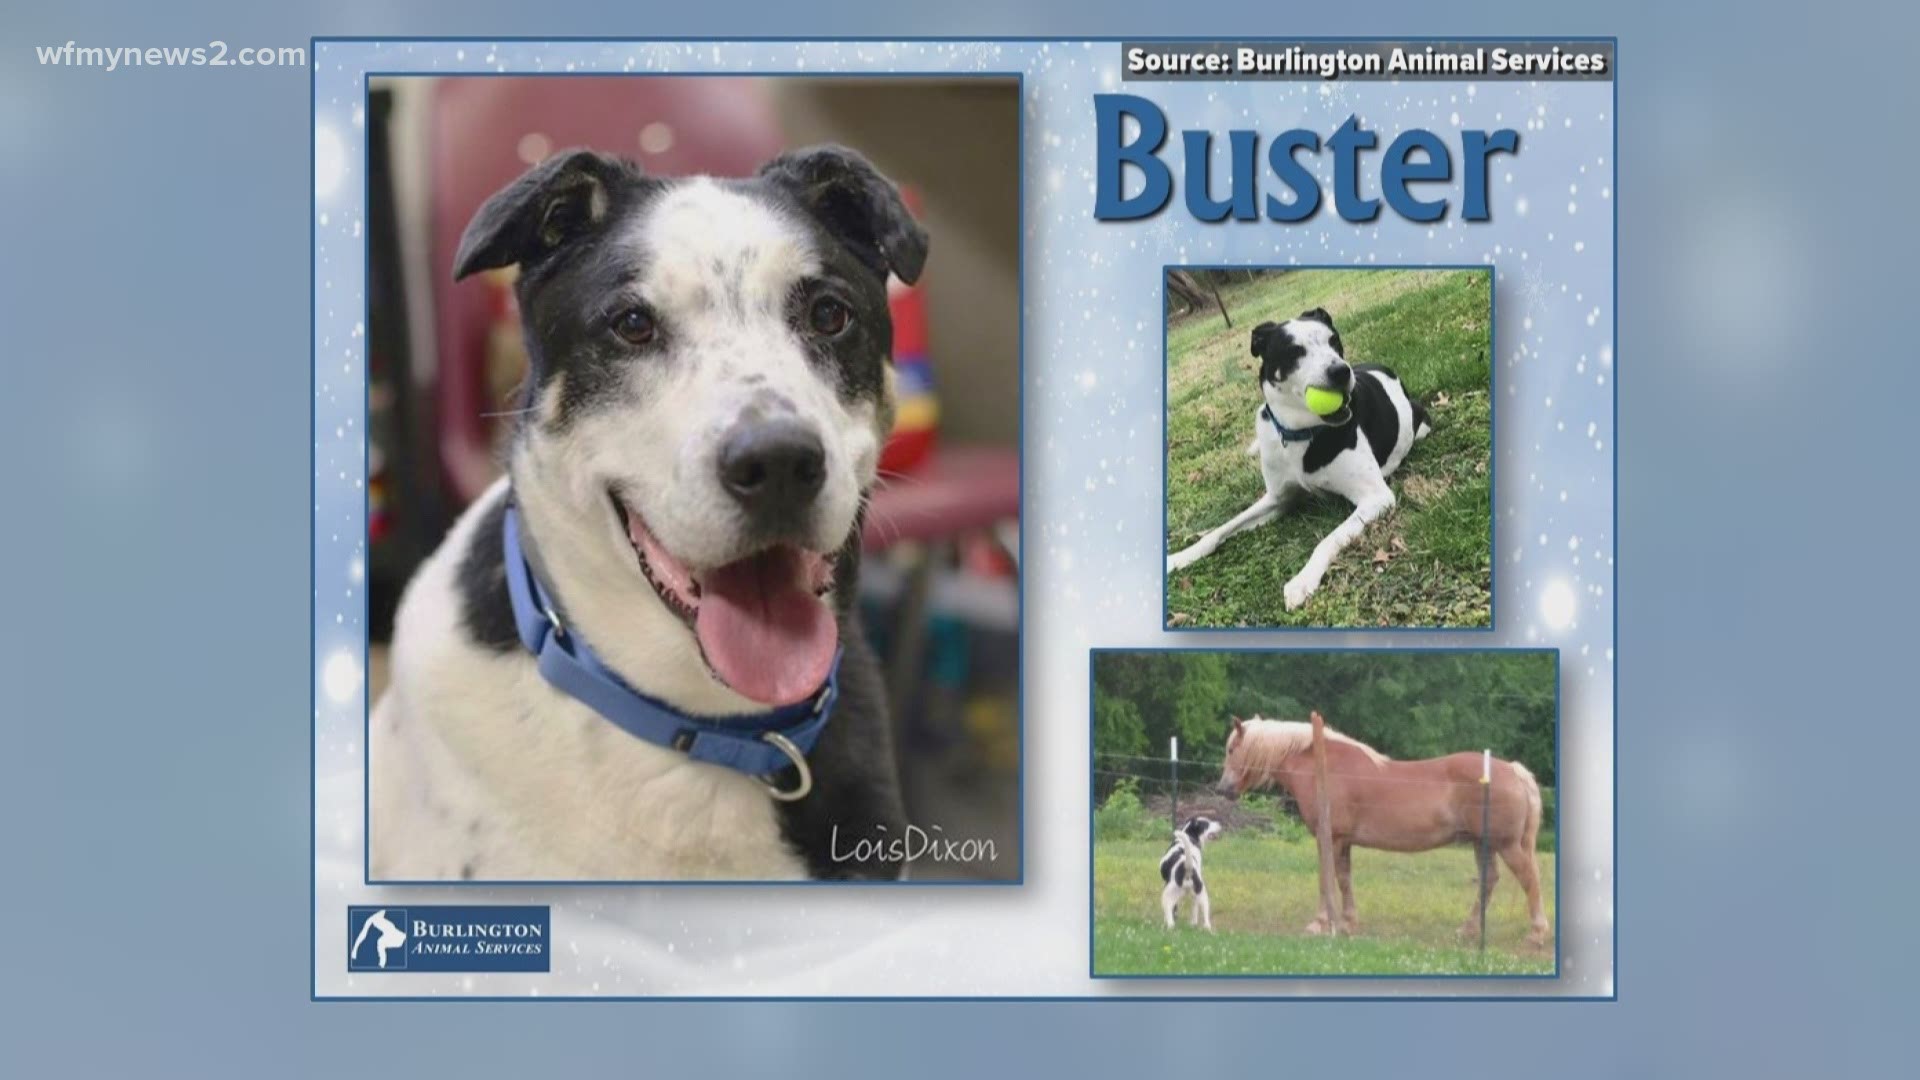 Your best pal, Buster wants to be a part of your family!